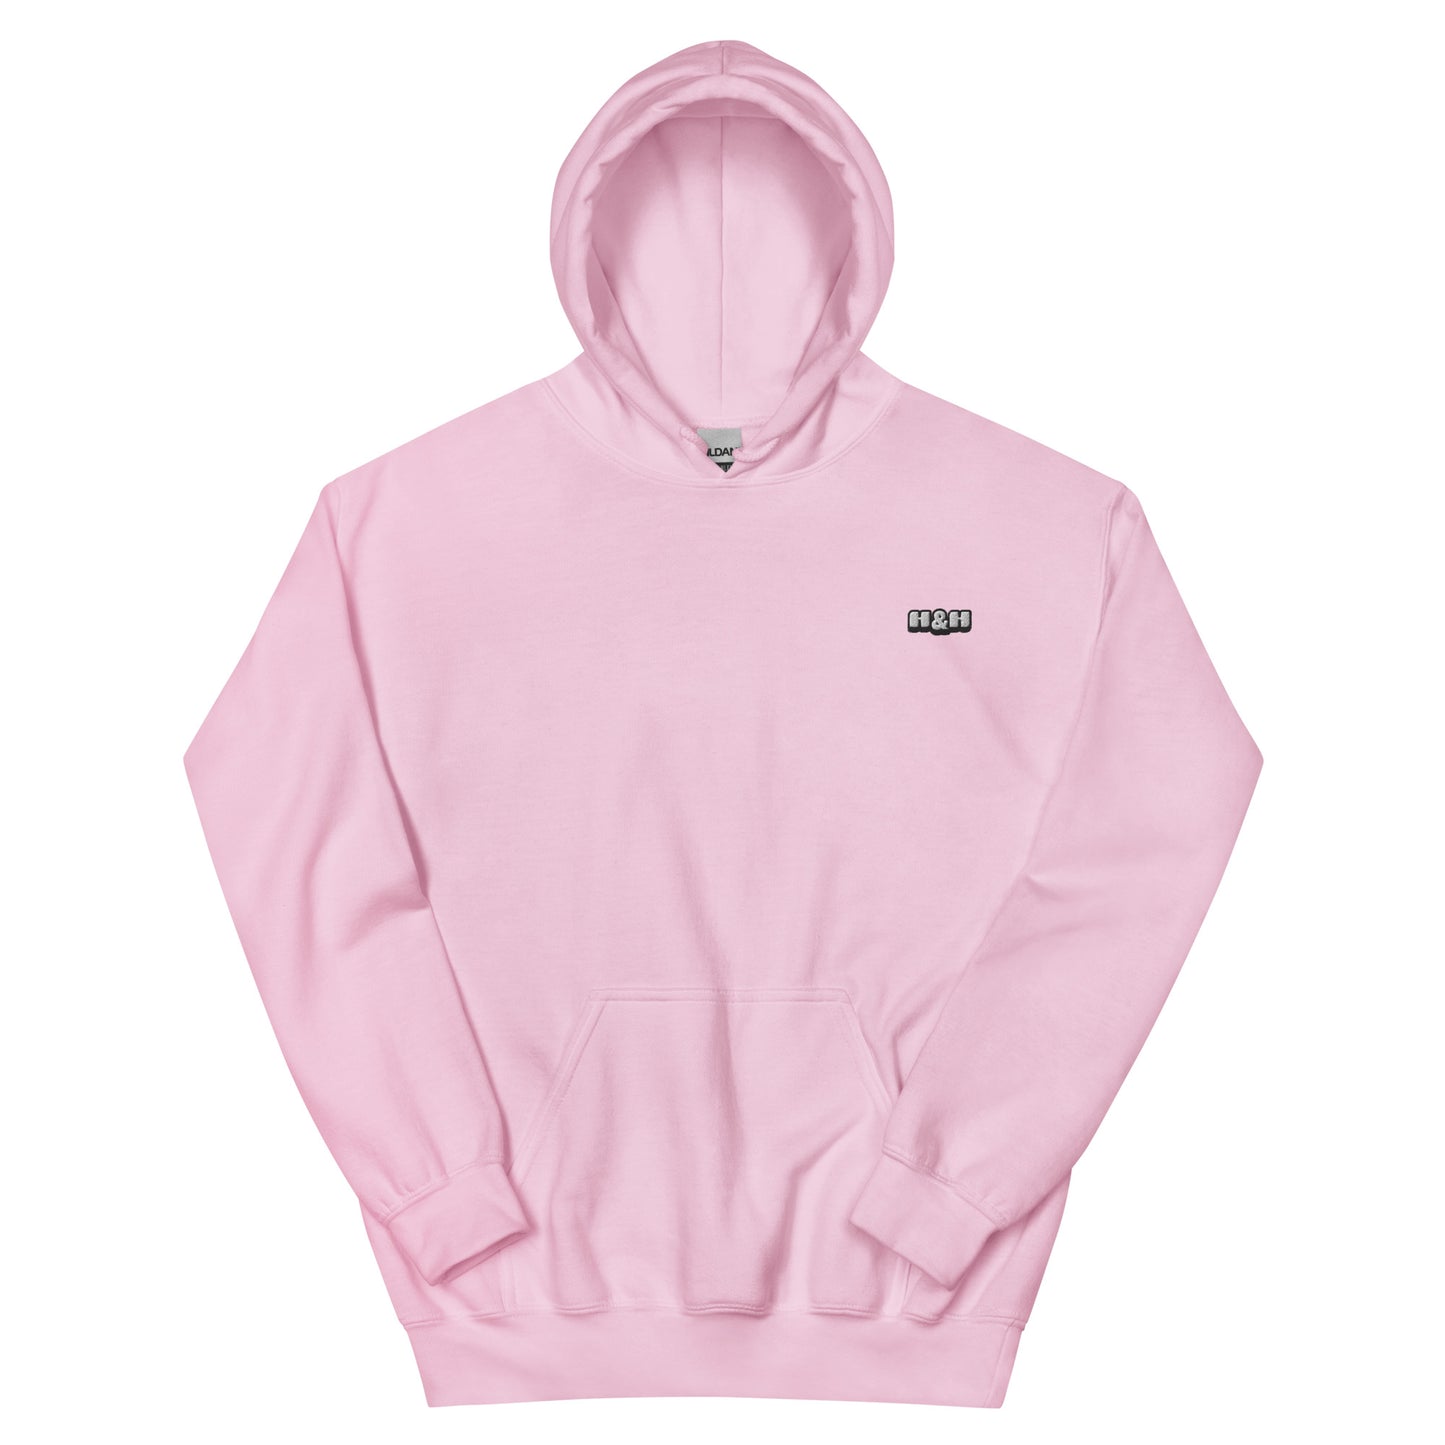 Yours Hoodie